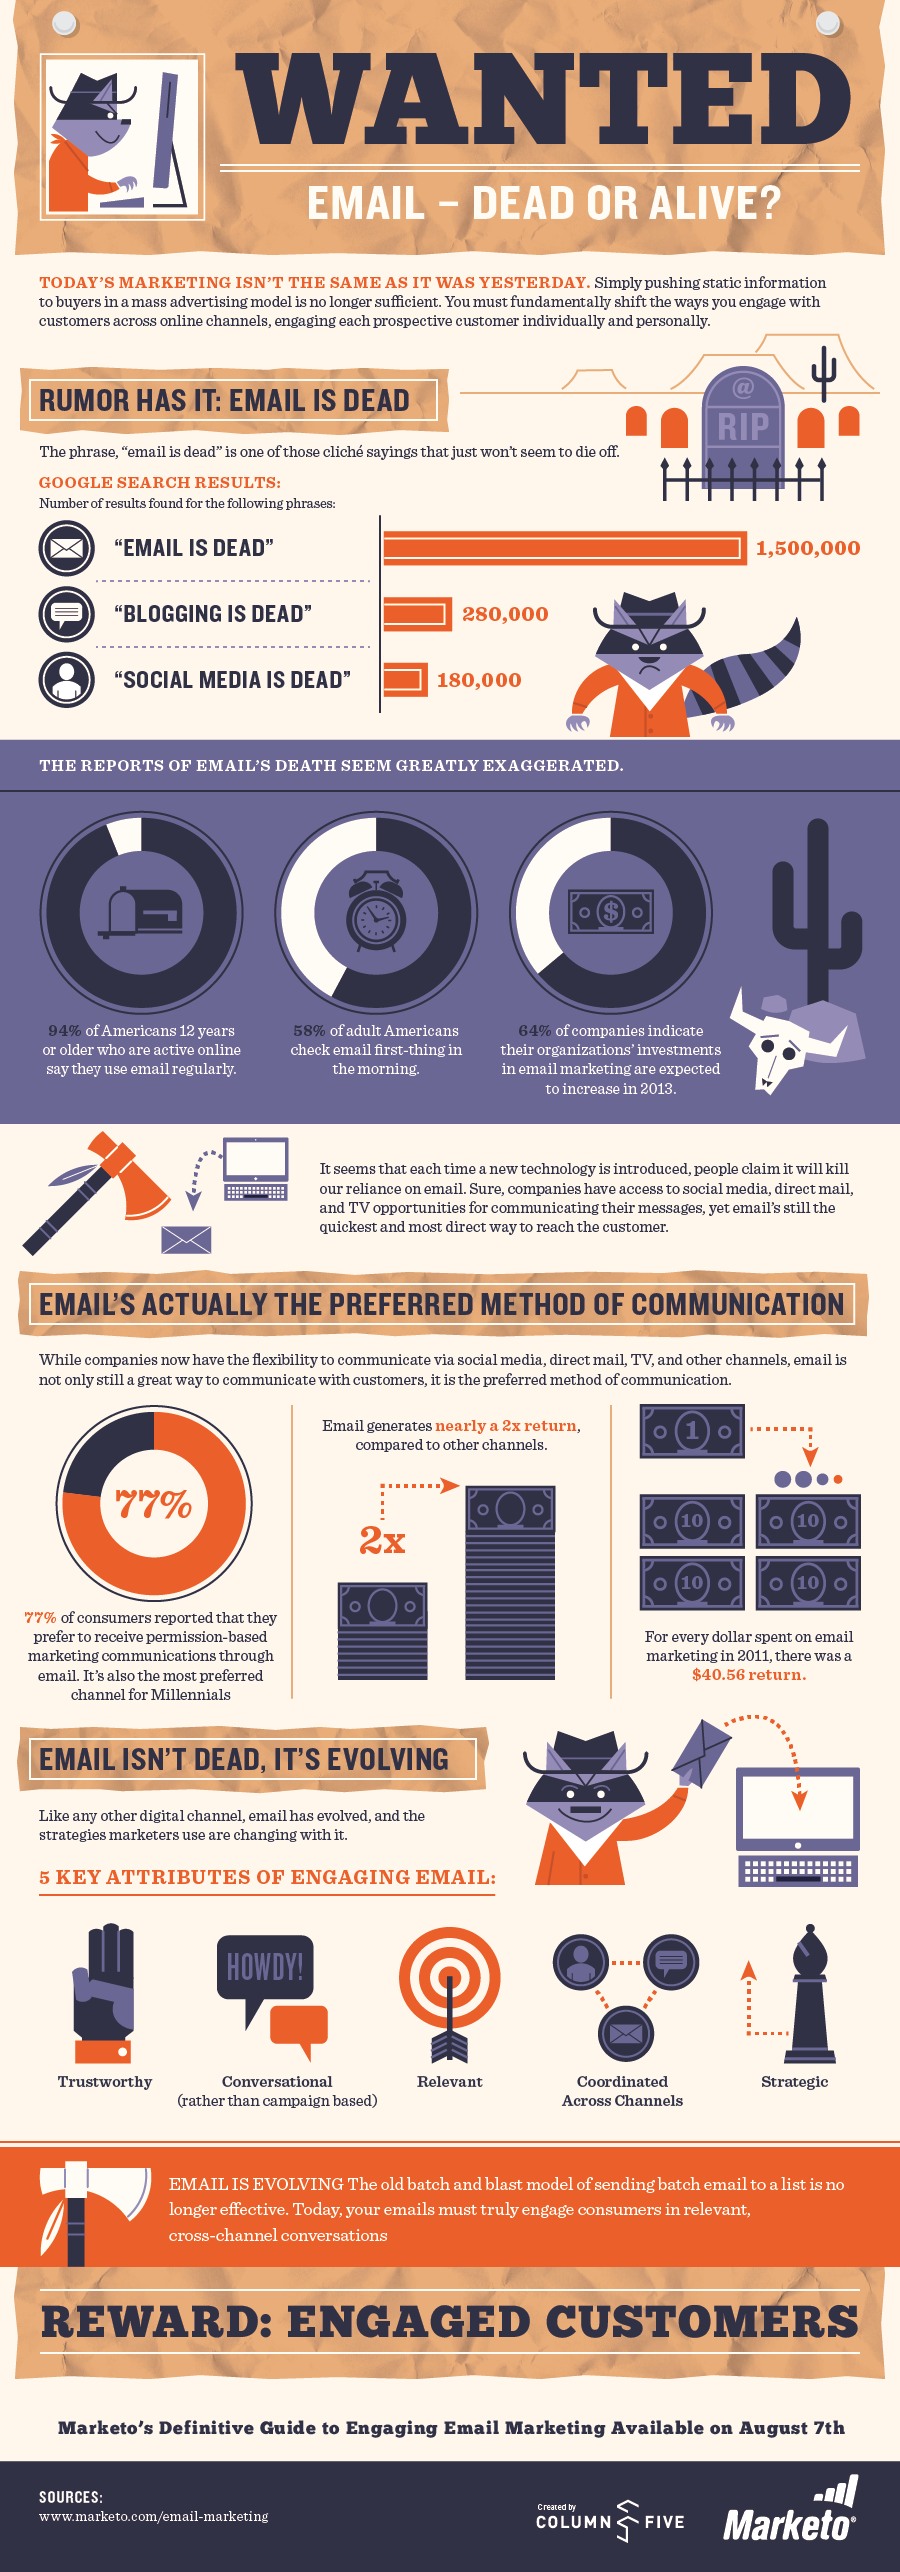 email_is_not_dead_infographic